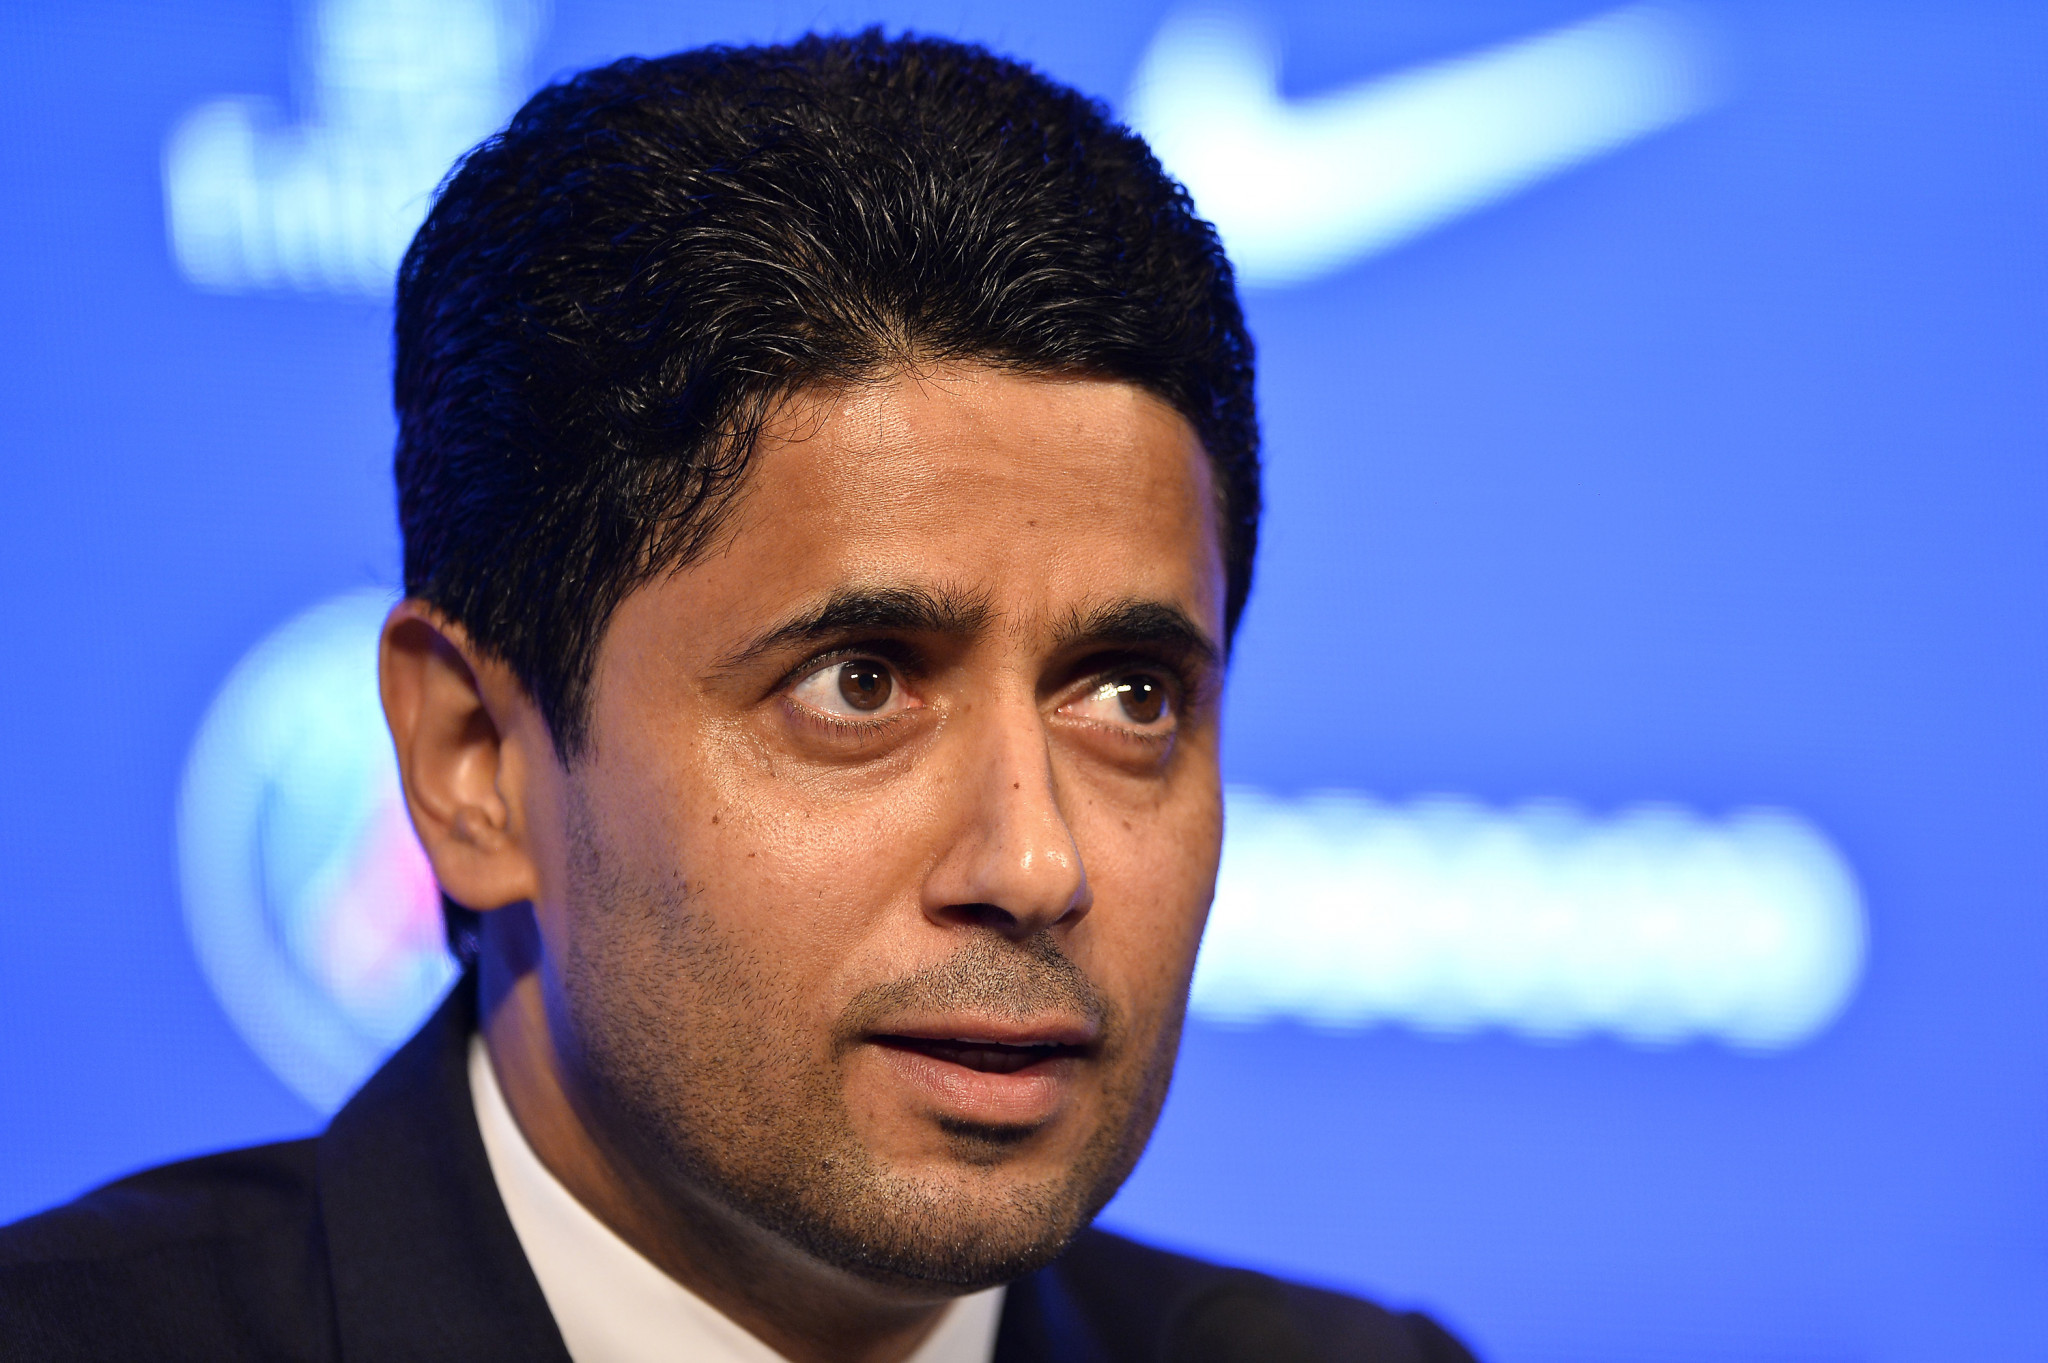 The trial of Nasser Al-Khelaifi in connection with the awarding of media rights for major football tournaments will begin in Switzerland in September ©Getty Images